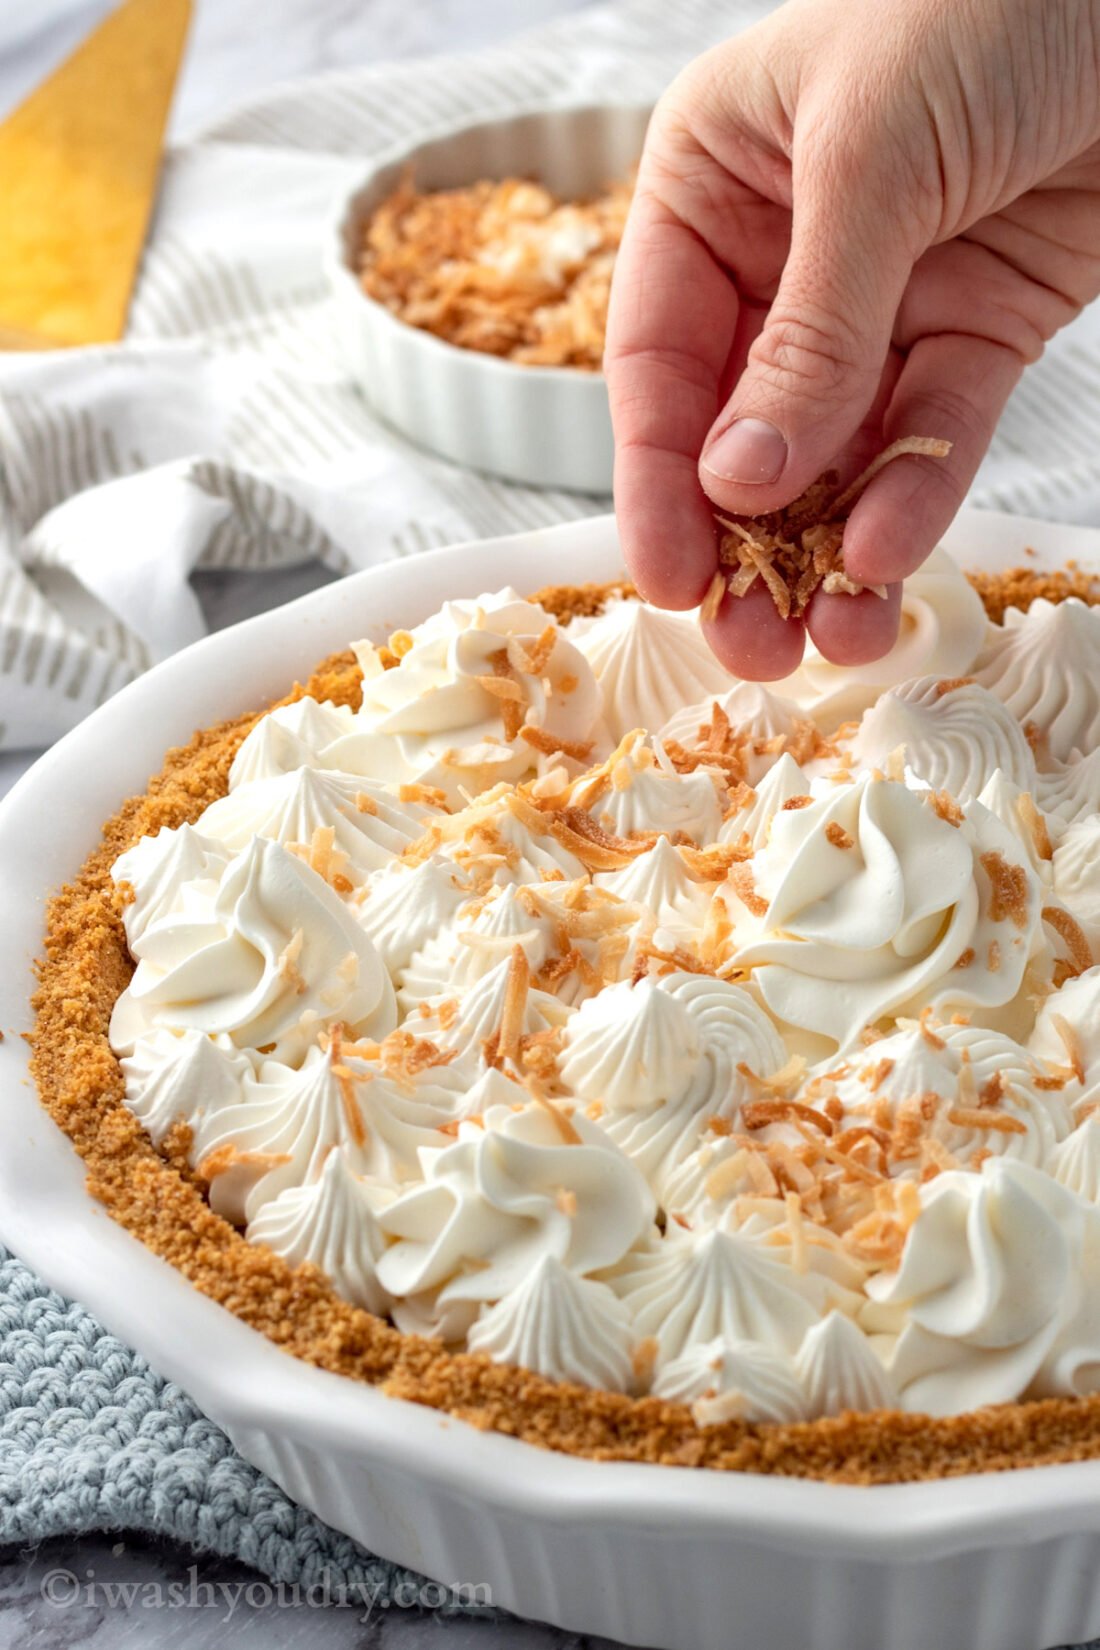 Sprinkling toasted coconut on pie.